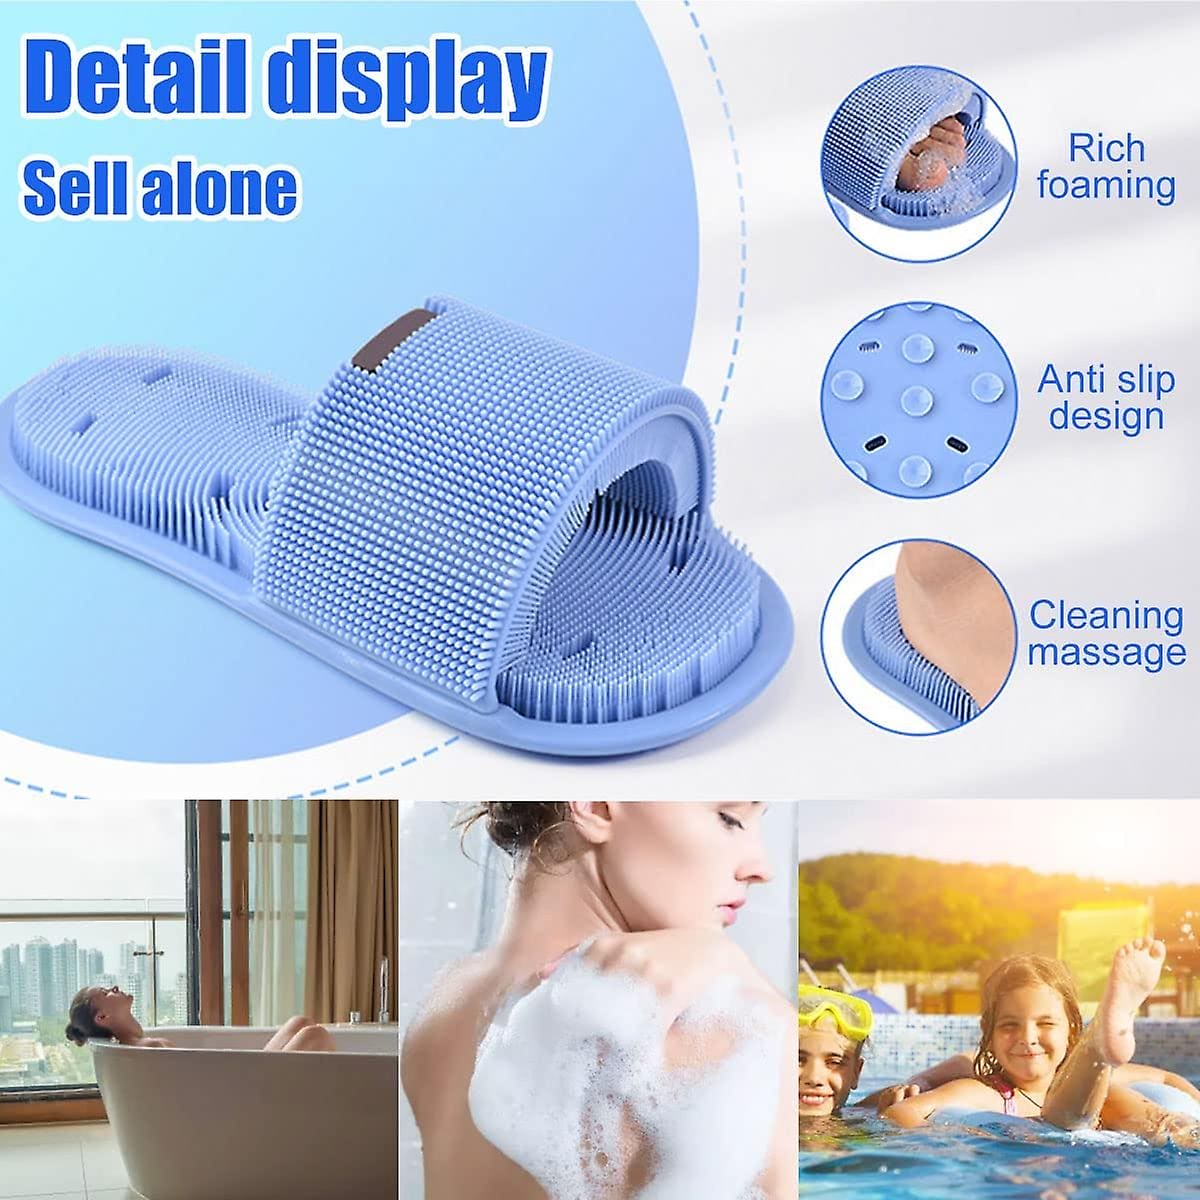 Home Massage Slipper, Foot Rubbing Silicone Slipper, Suction Cup Massager Slippers, Non Slip Suction Cup Foot Relief Massager Cleaner for Men and Women, Shower Feet Cleaning Brush